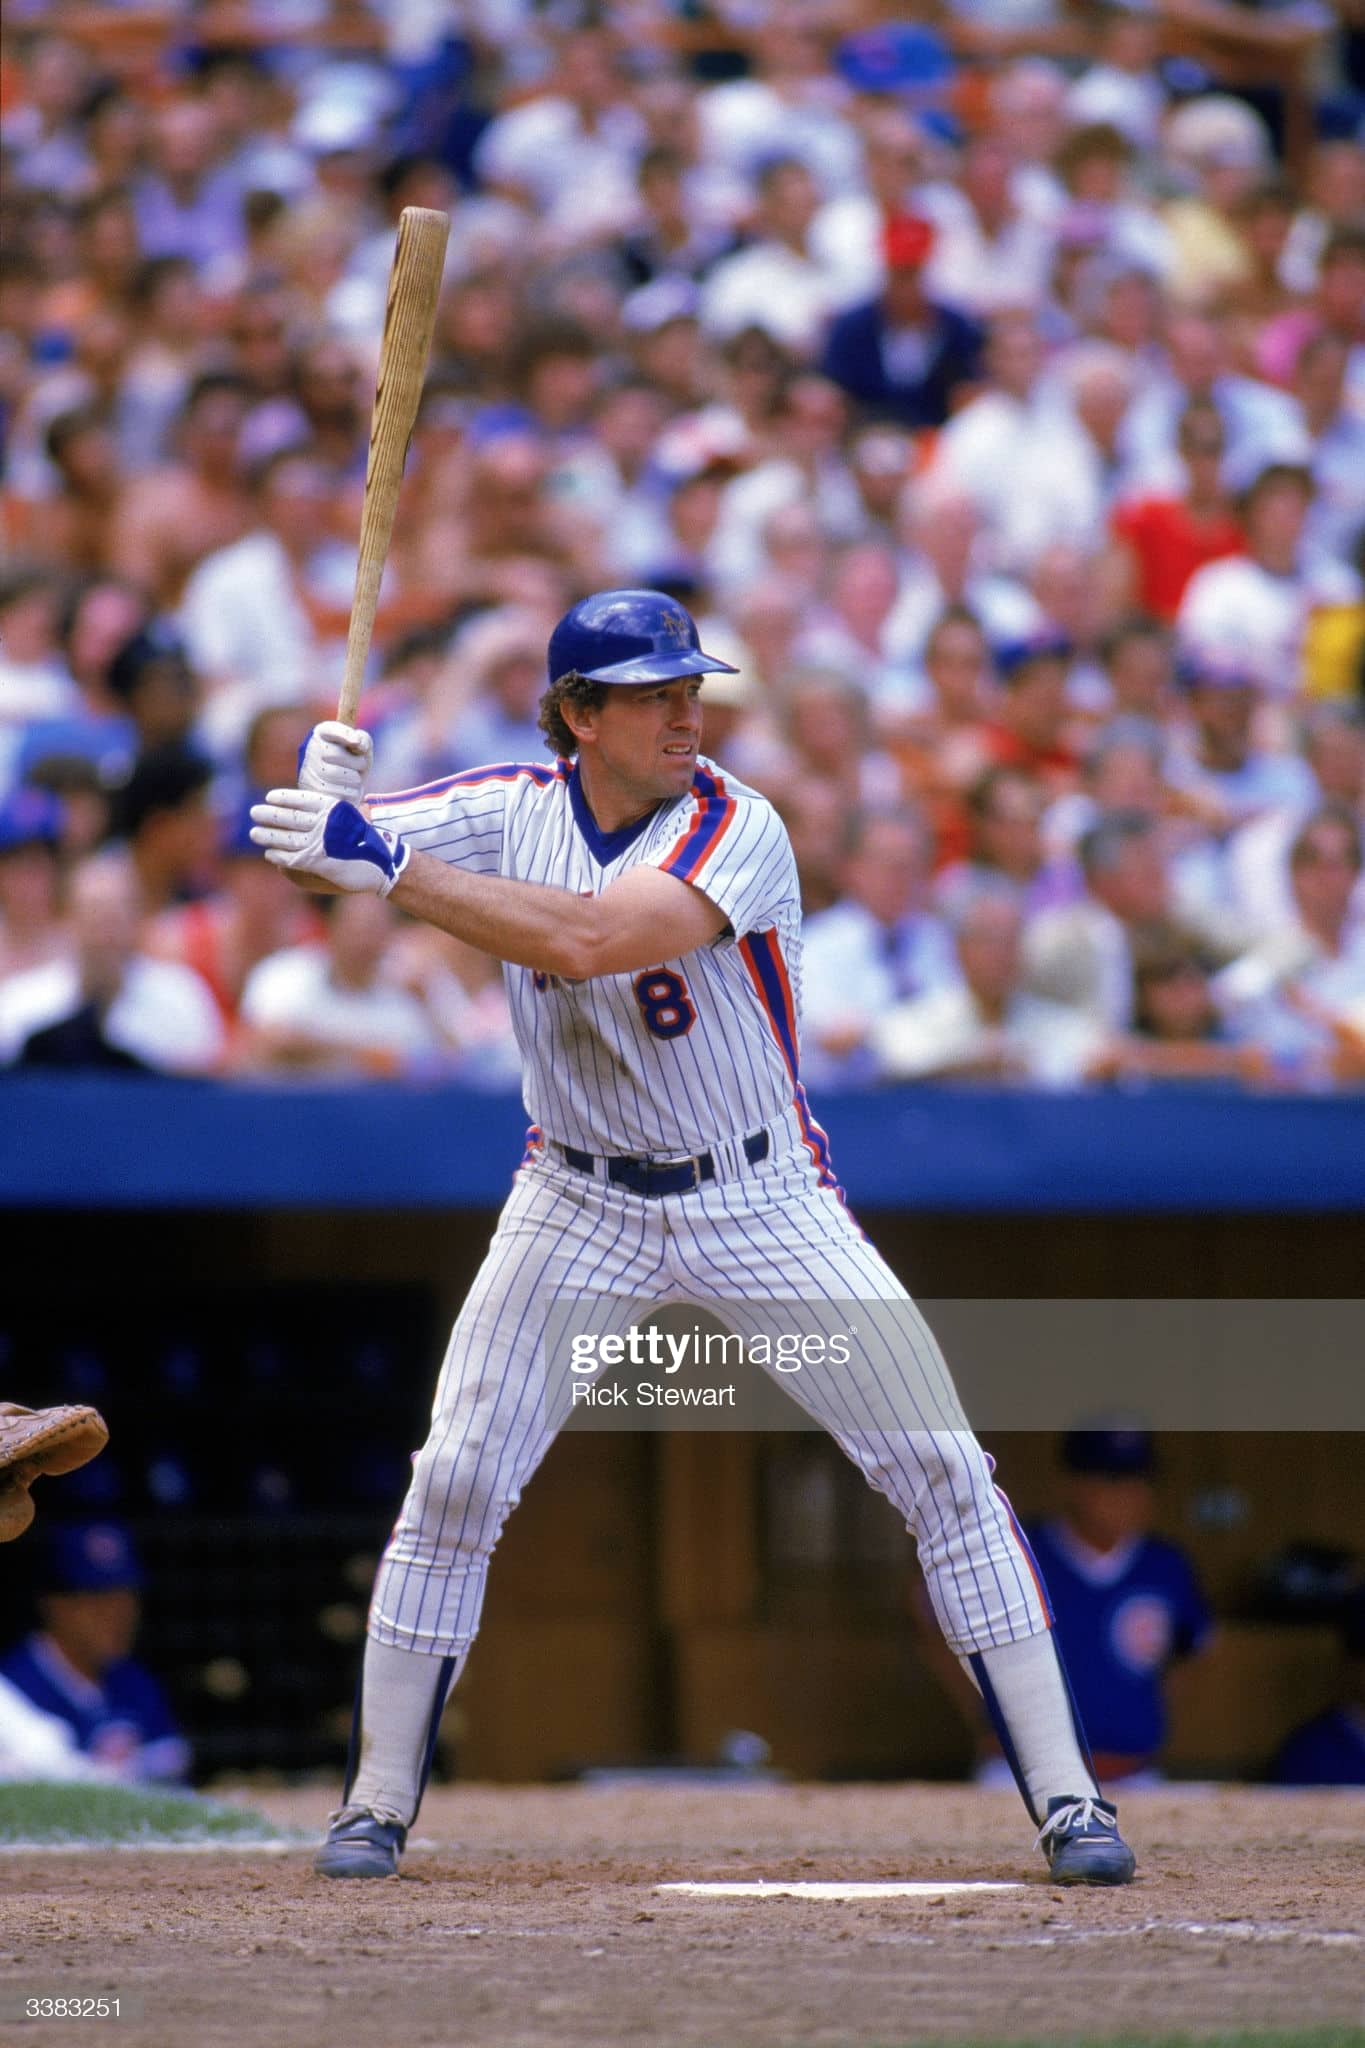 Gary Carter batting in 1985 for the Mets, at Shea Stadium